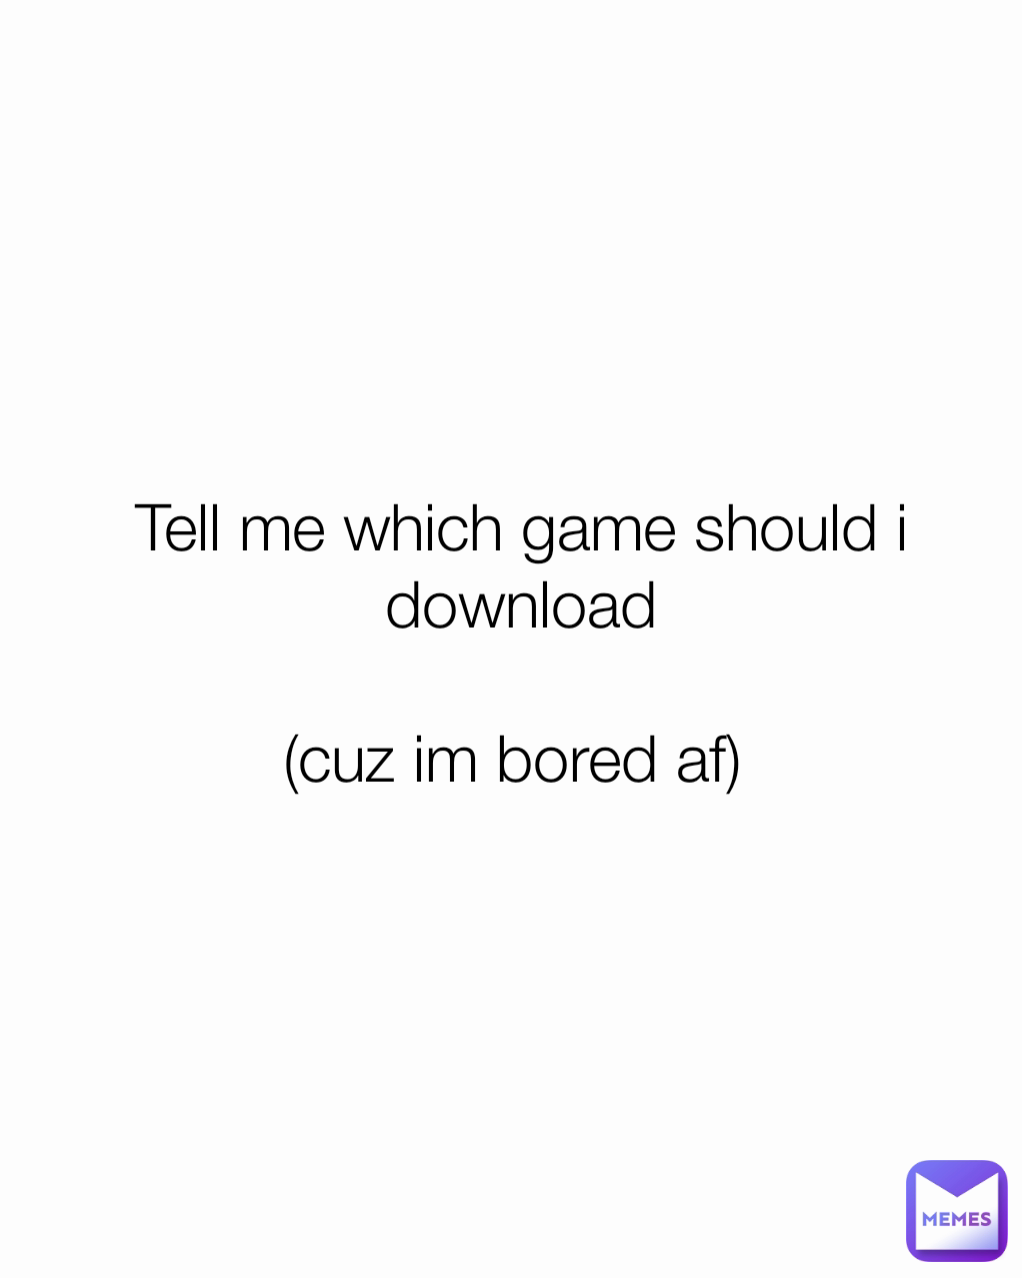 Tell me which game should i download

(cuz im bored af) 